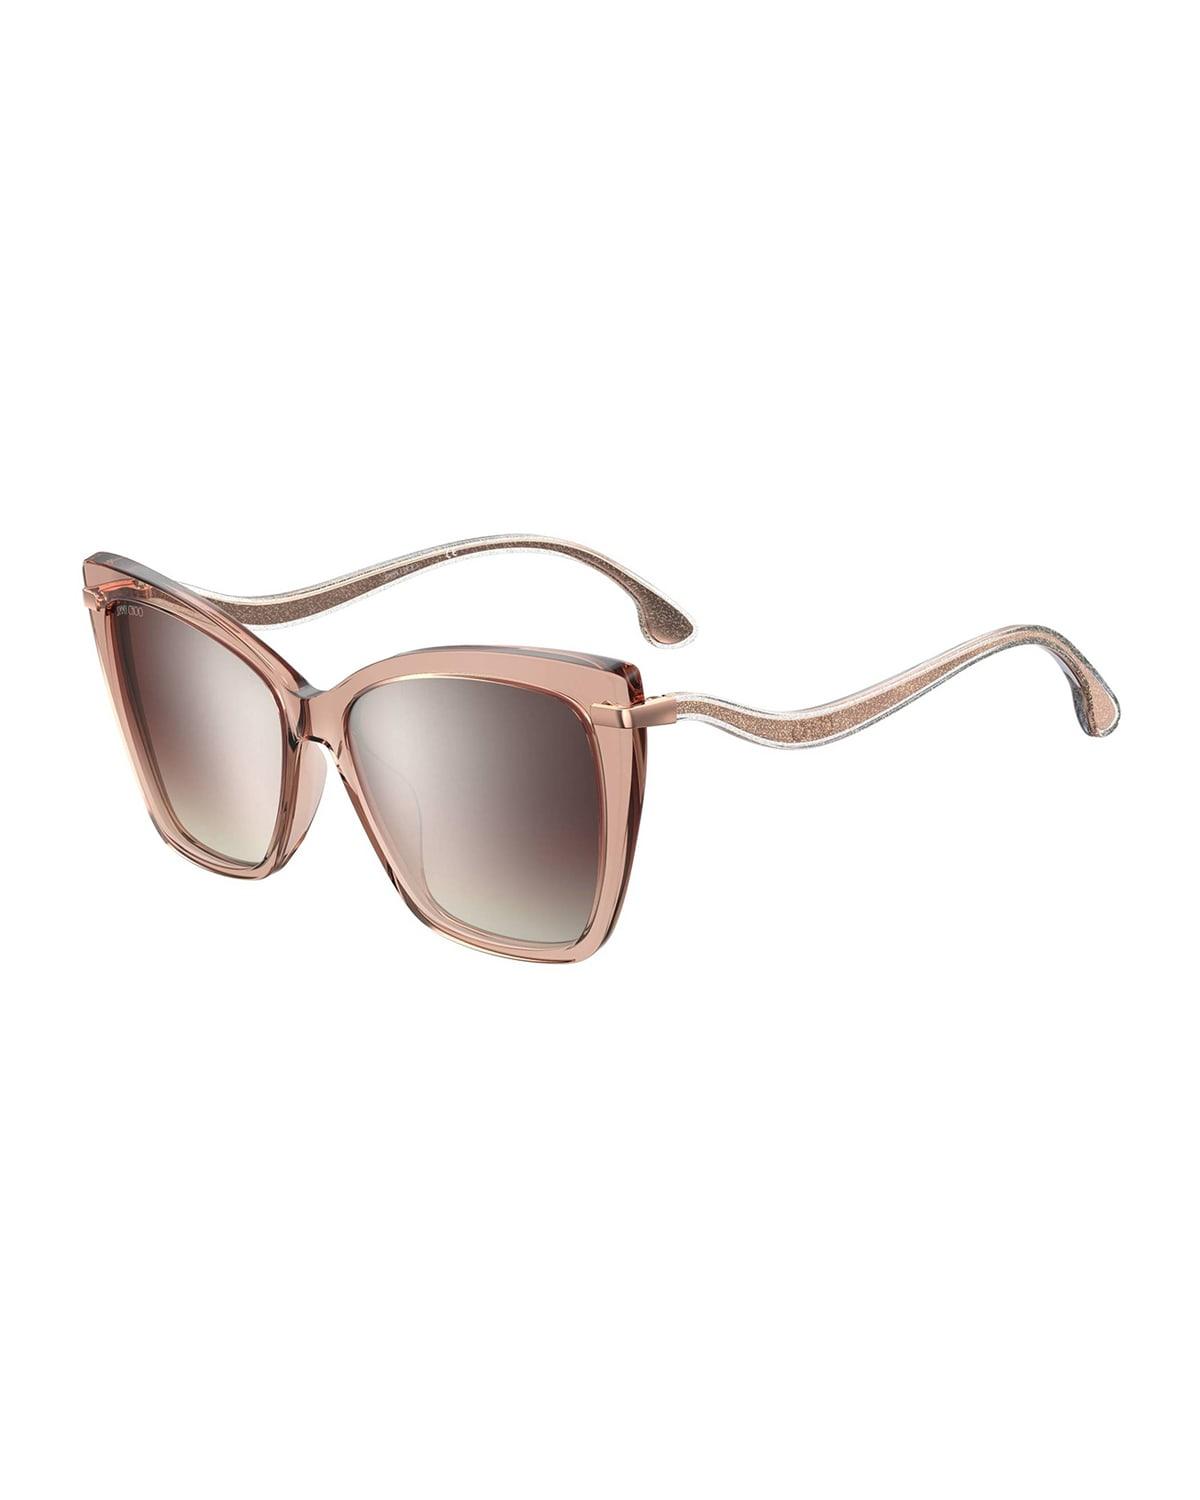 Jimmy Choo Selby Mirrored Butterfly Acetate Sunglasses in Natural | Lyst